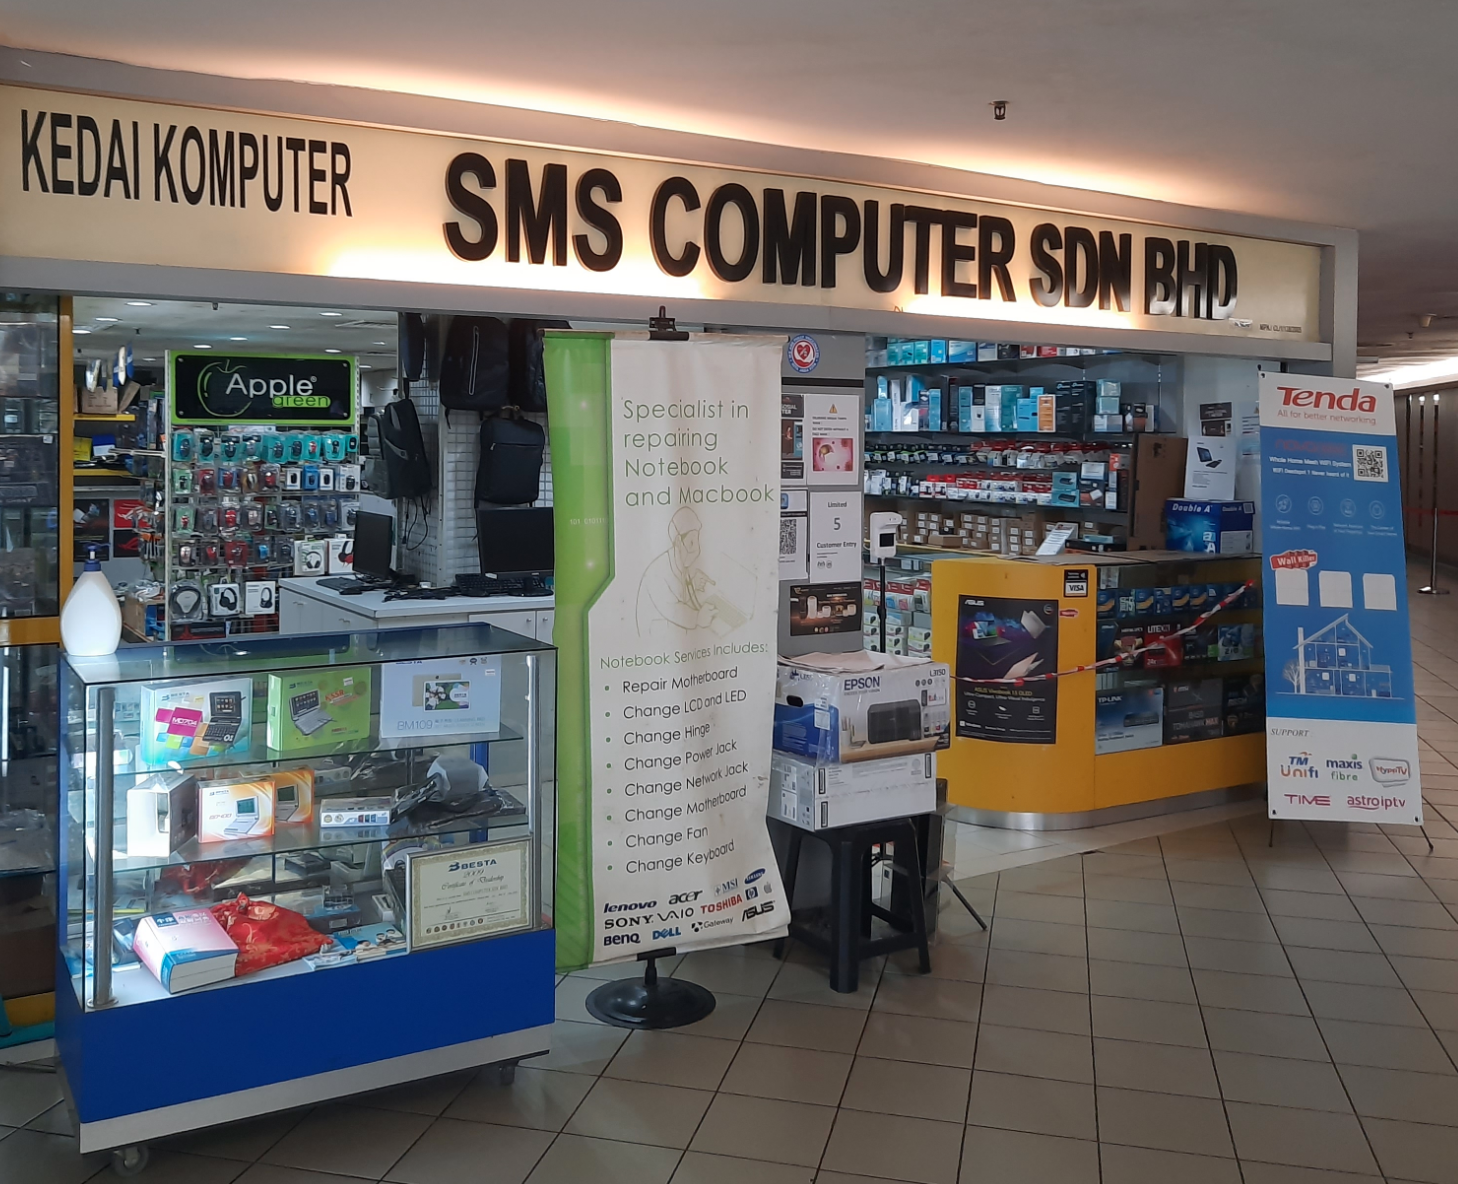 SMS Computer